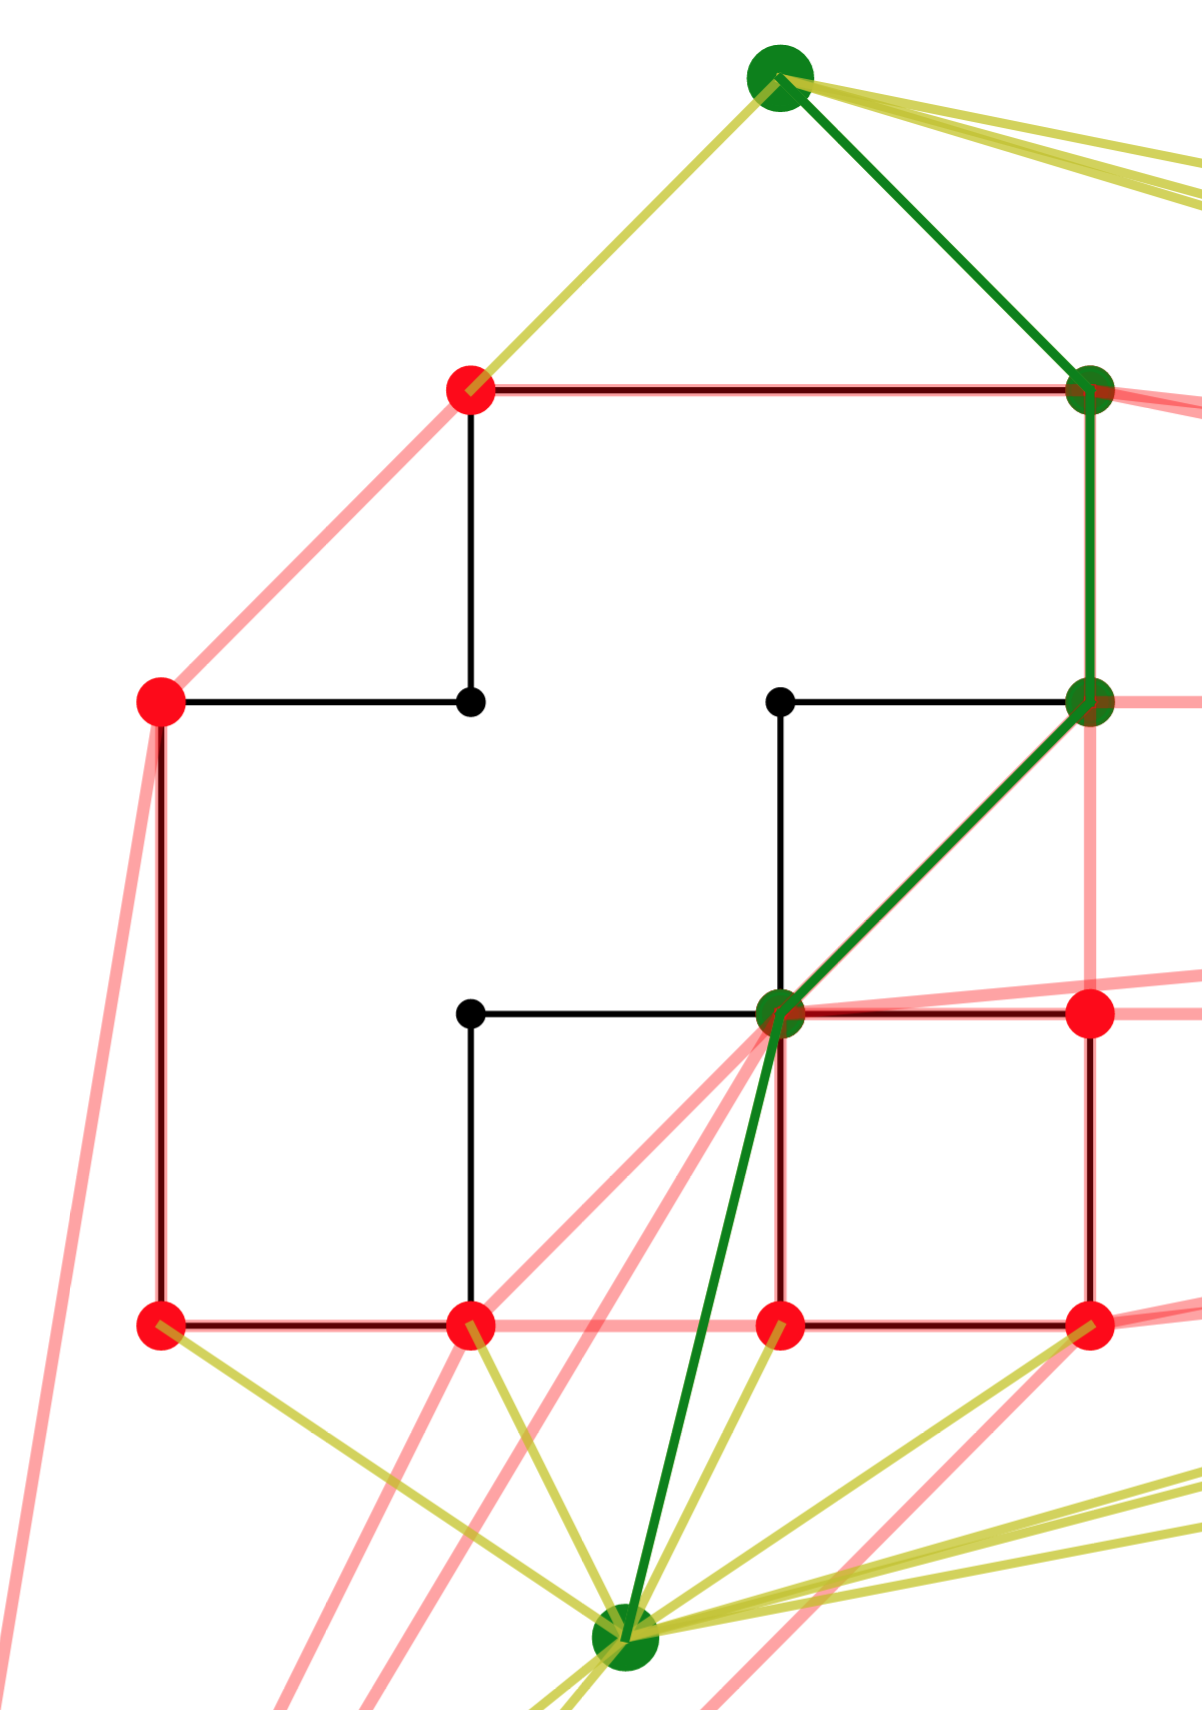 _images/path_overlapping_vertices.png